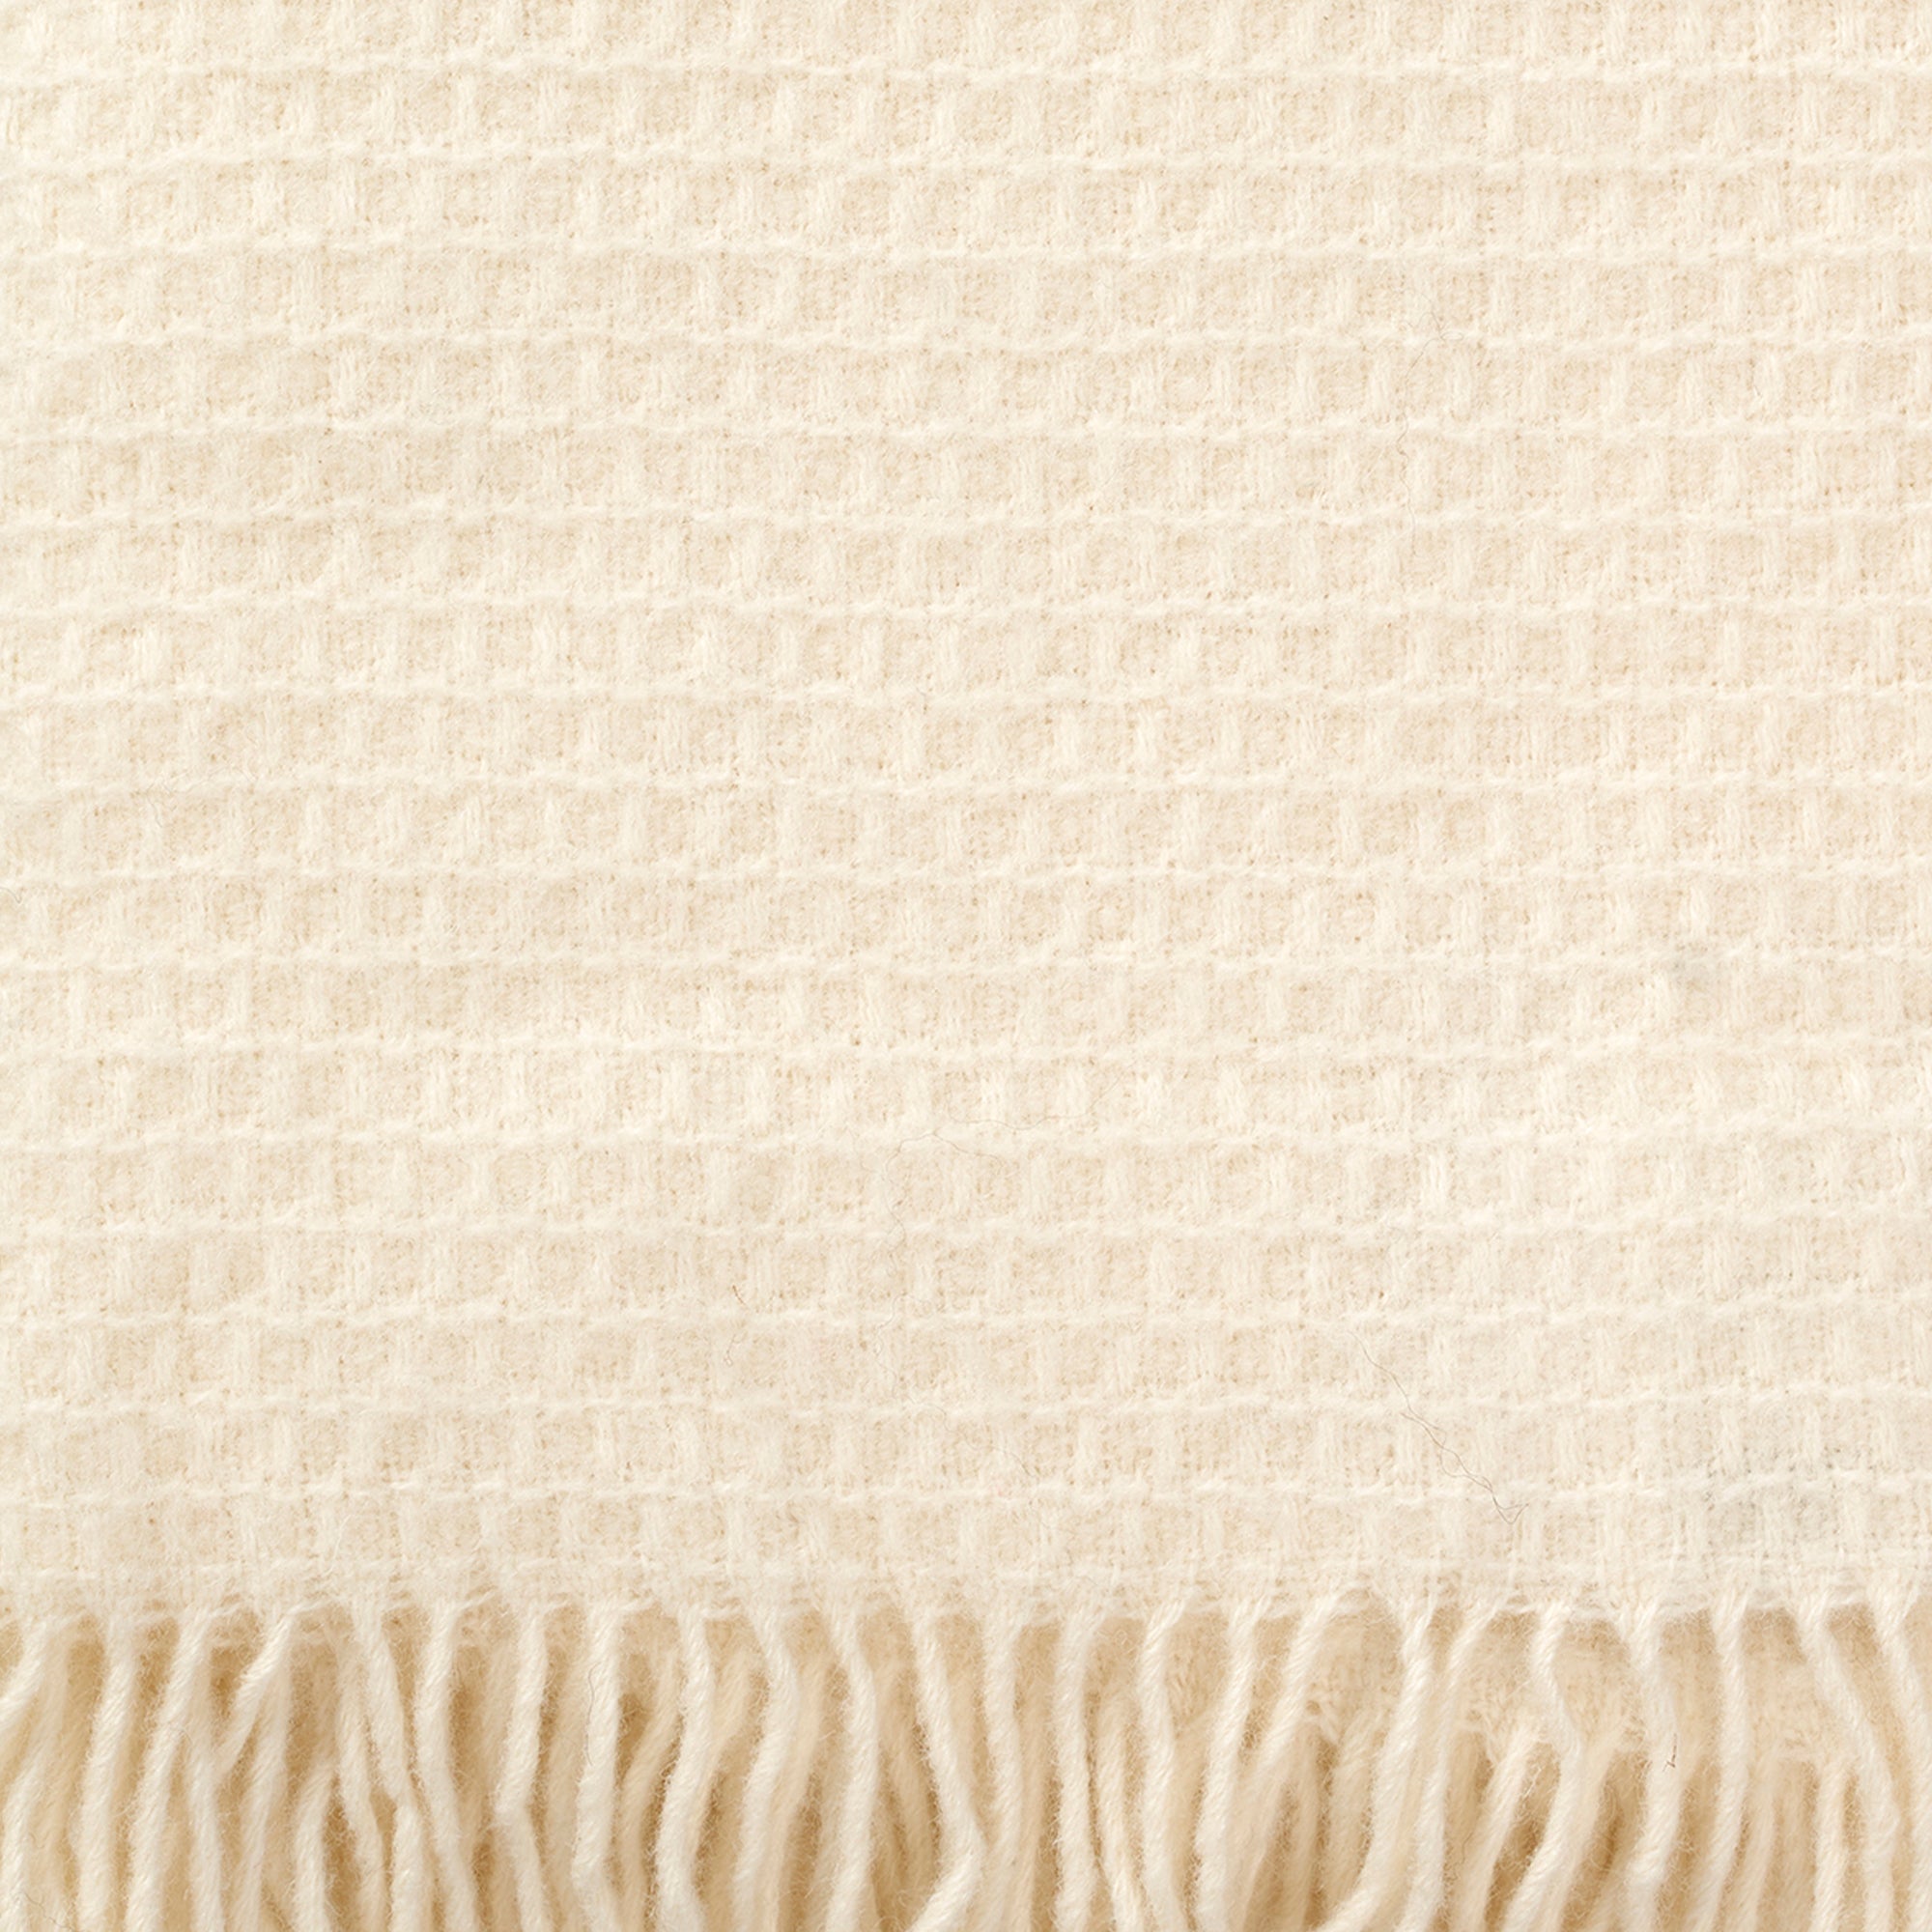 Knut Natural White 130x200cm Lambswool Throw